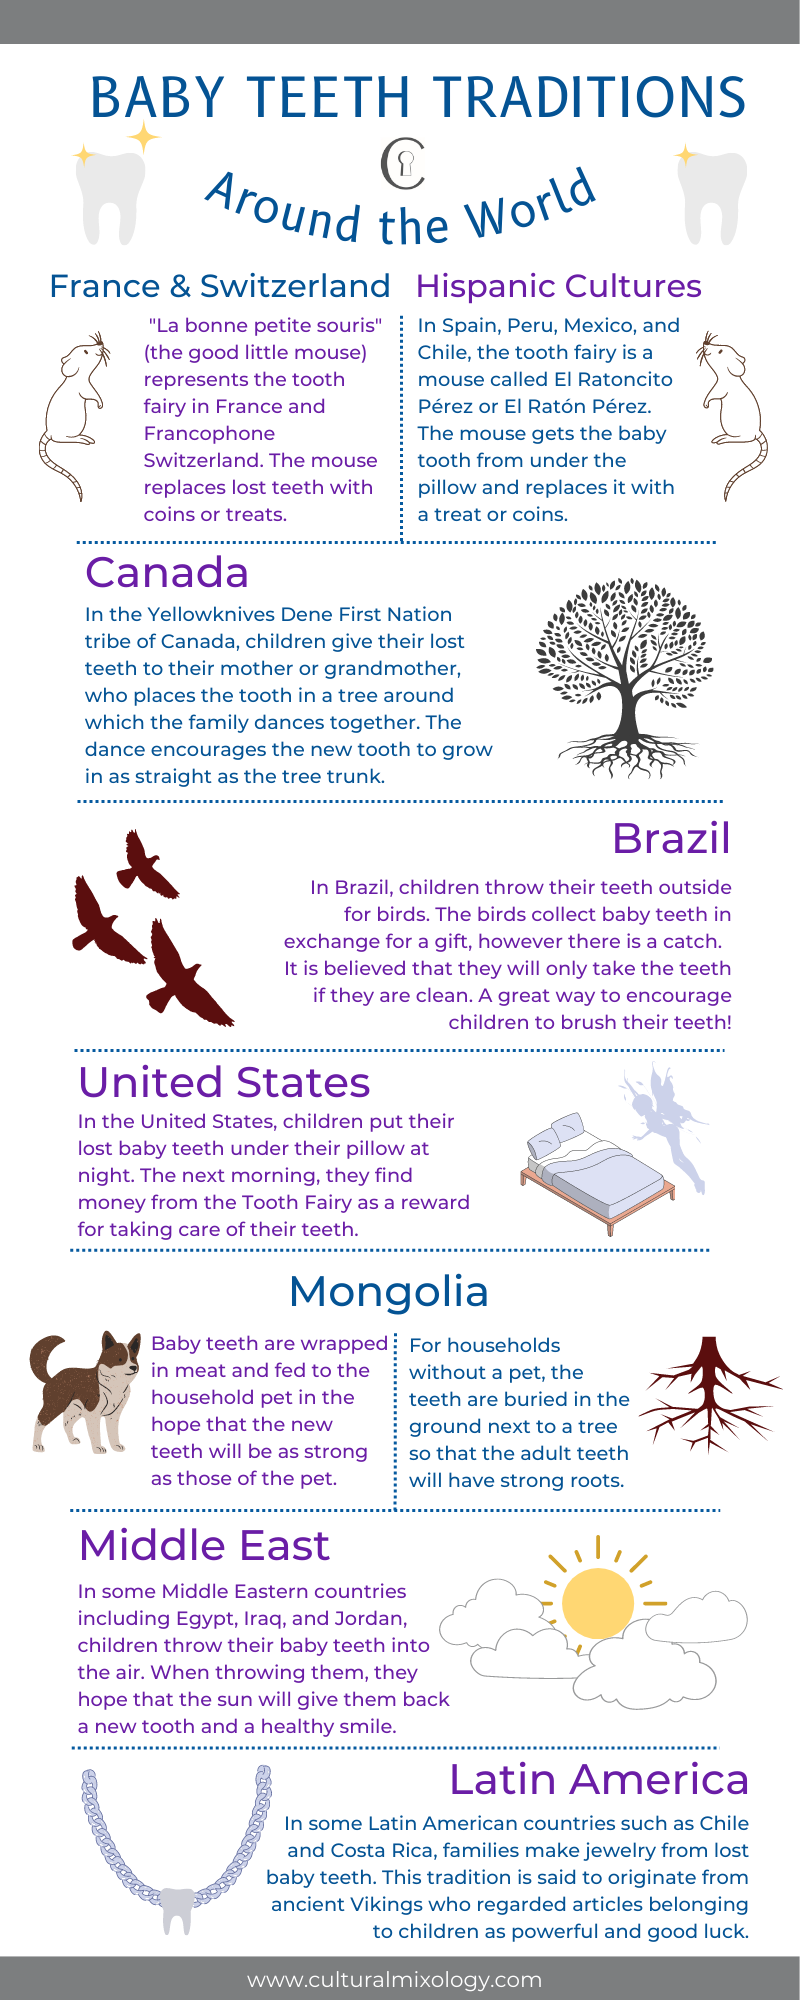 Infographic - Baby Teeth Traditions Around the World